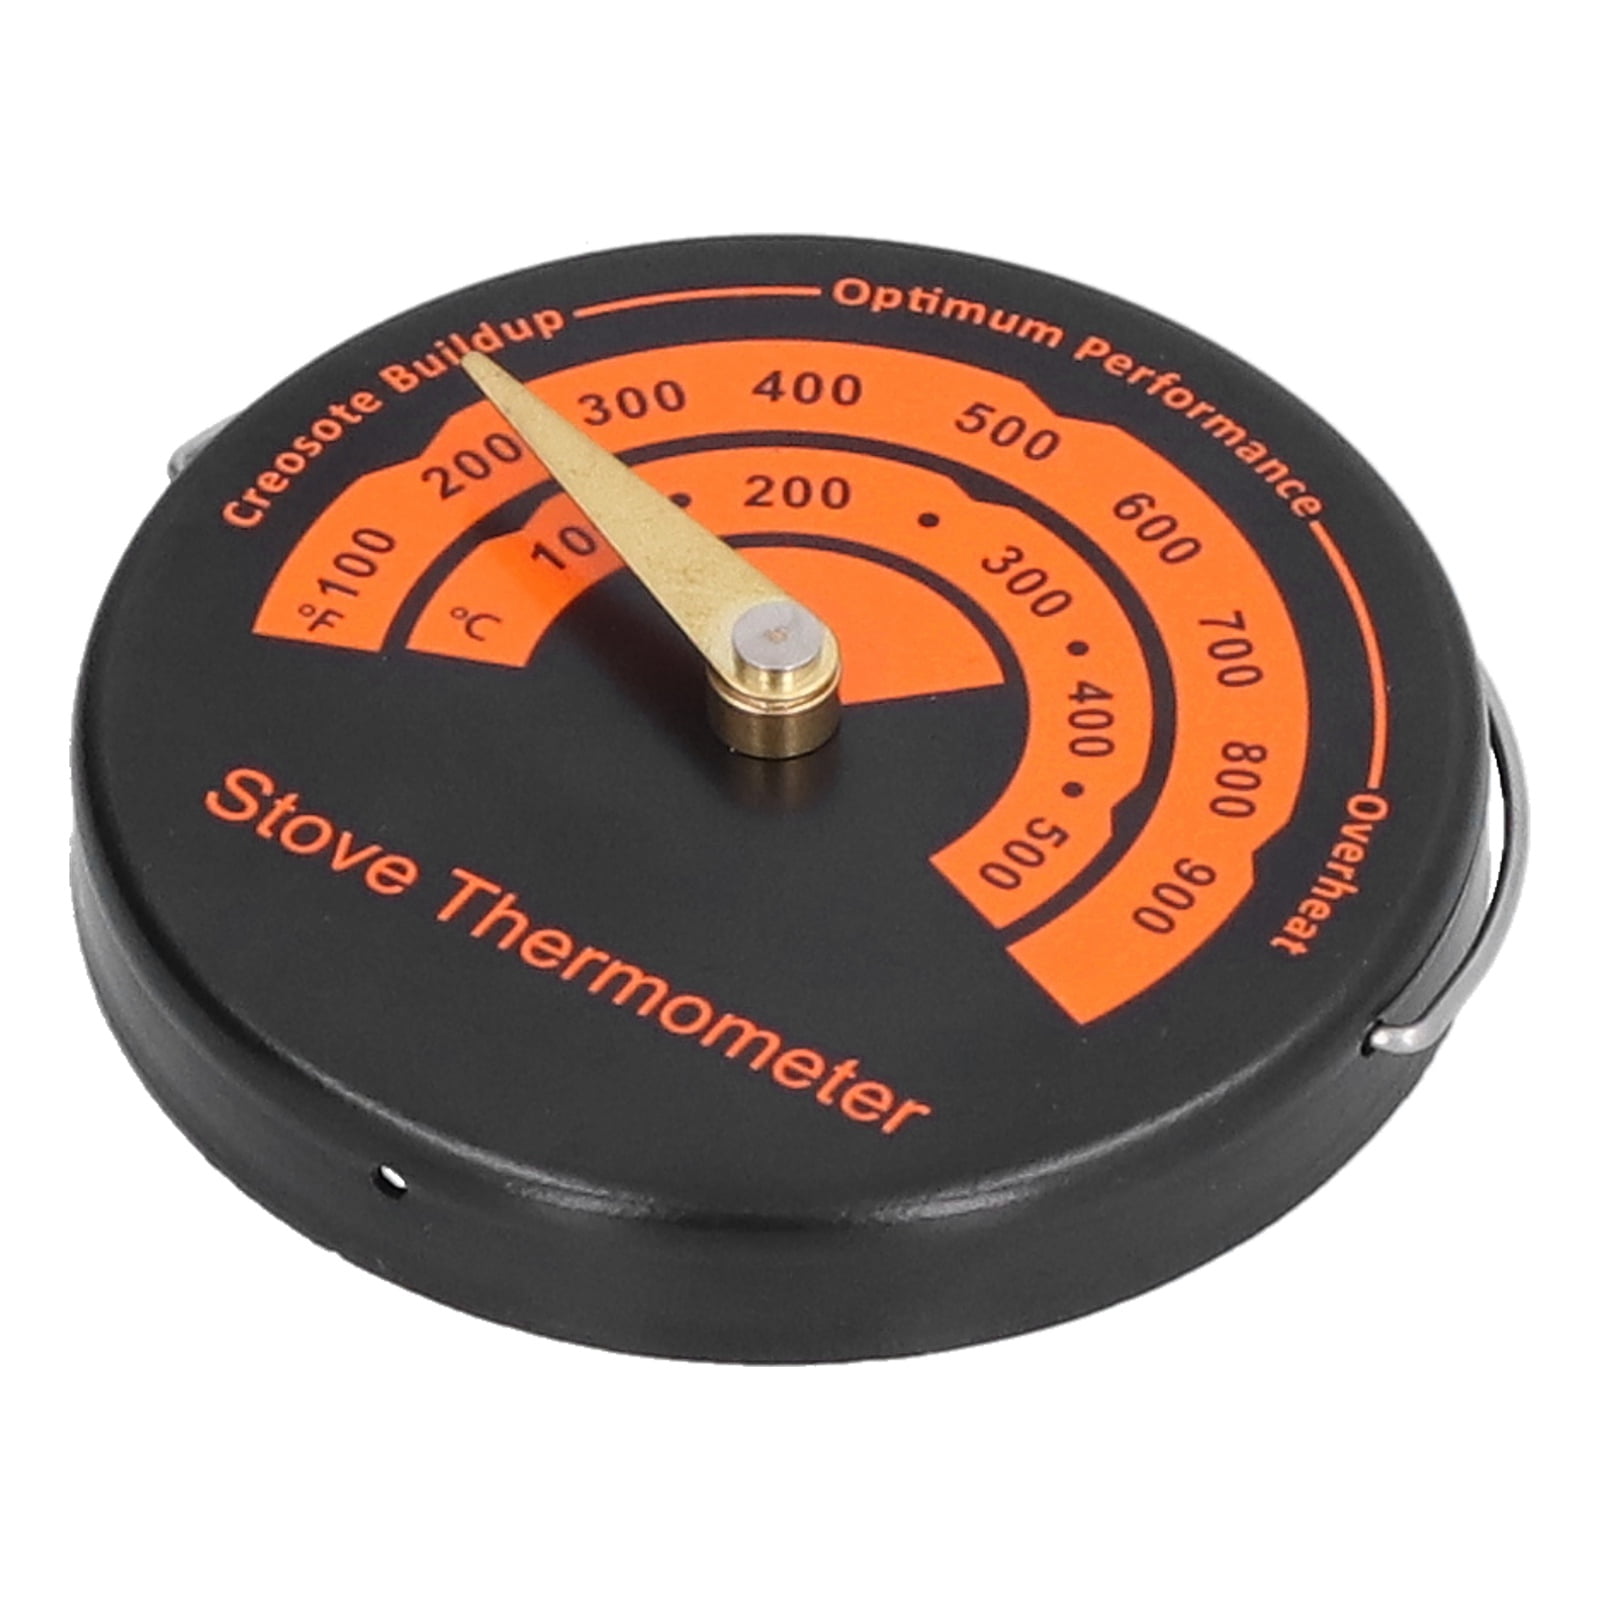 Magnetic Stove Thermometer, Prevent Overheating Easy Installation